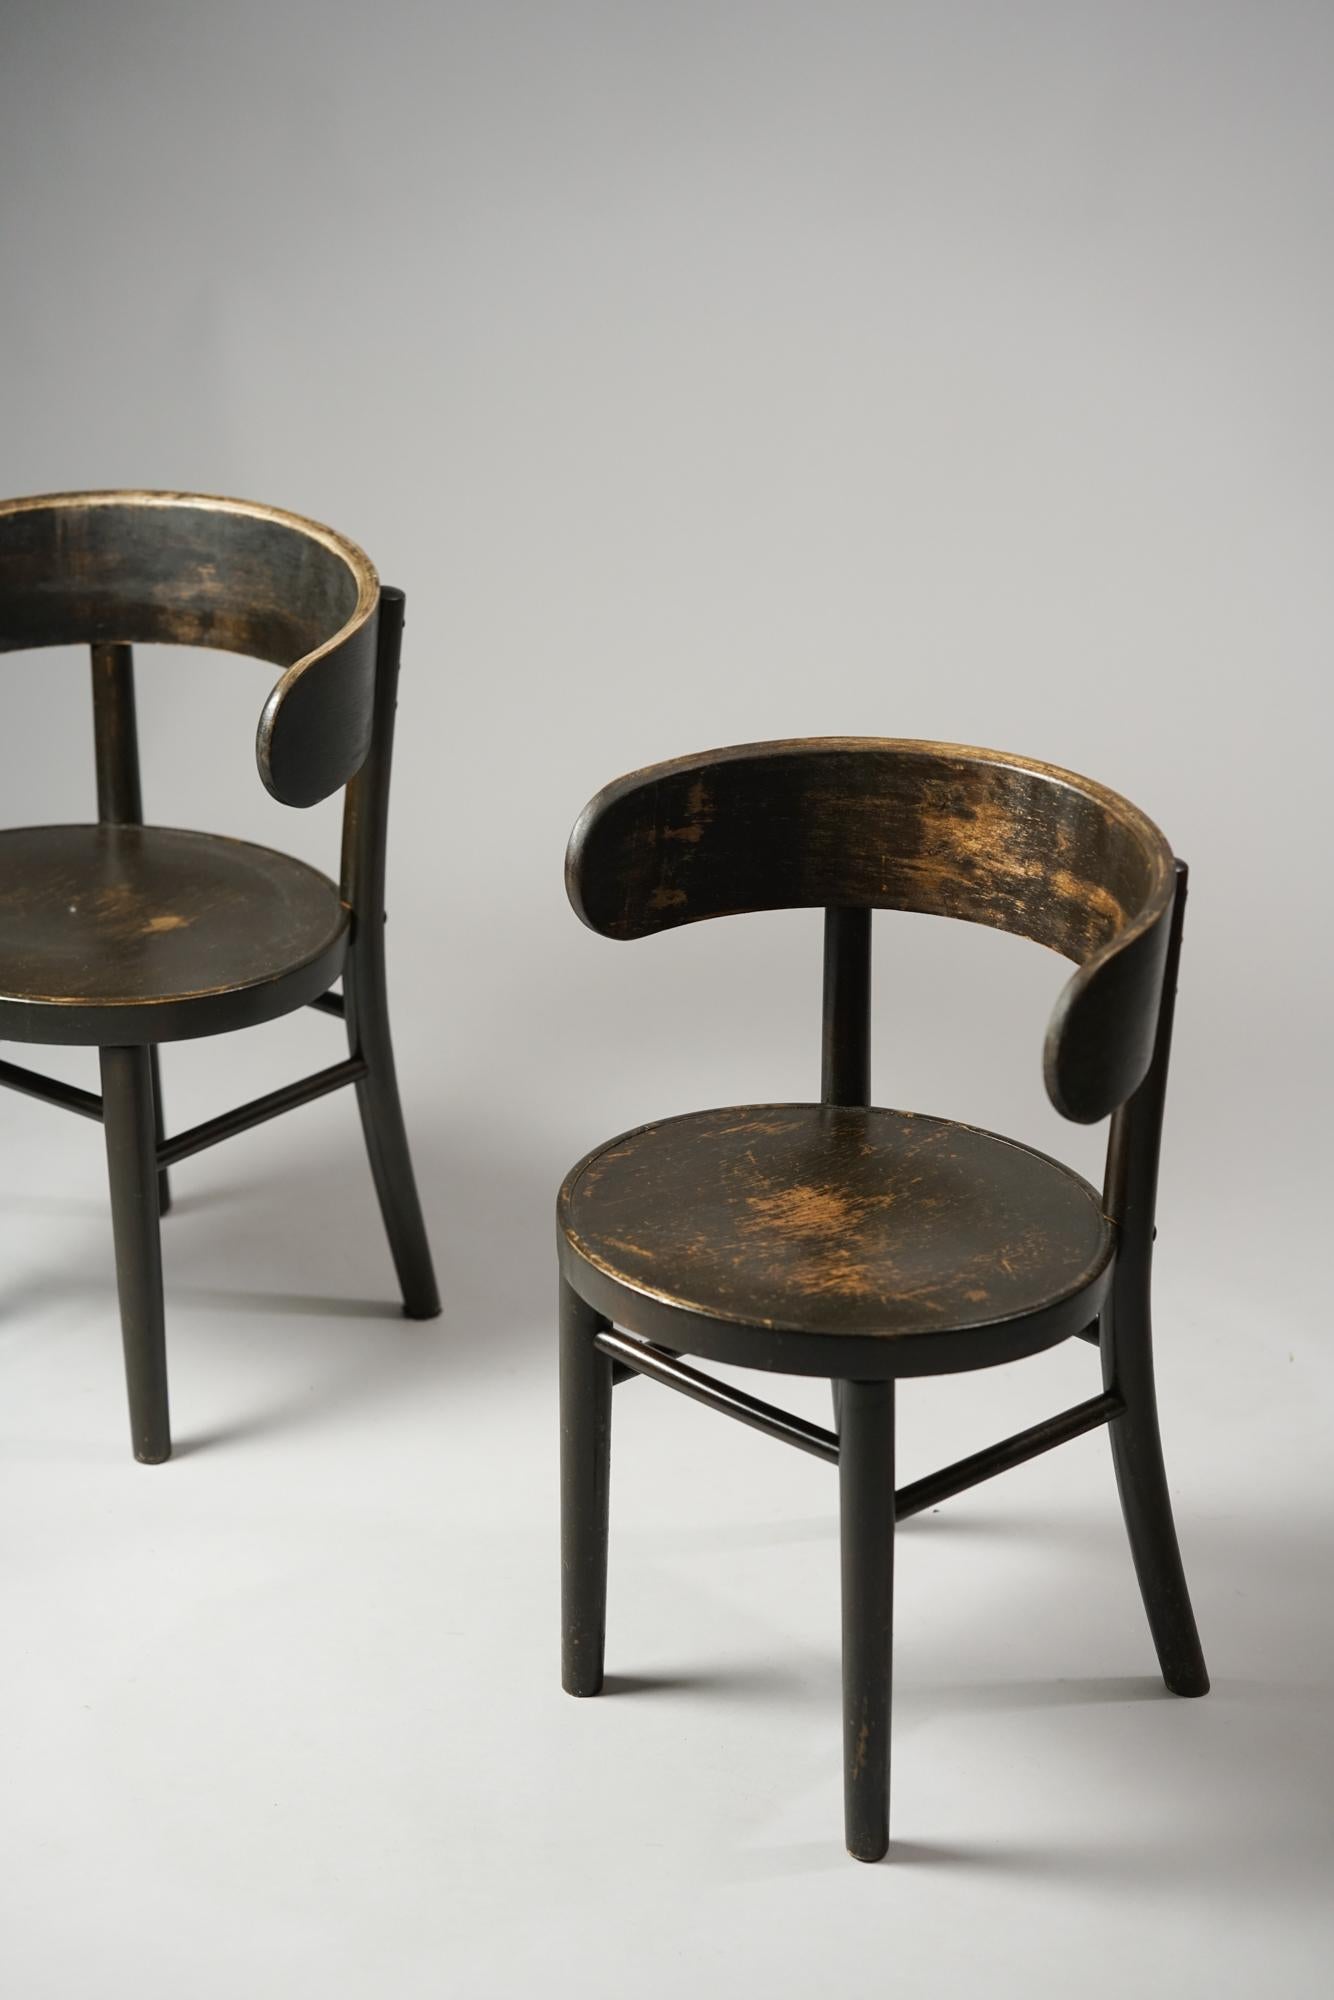 20th Century Set of Werner West Finnish Midcentury 'Hugging' Chairs, 1930s